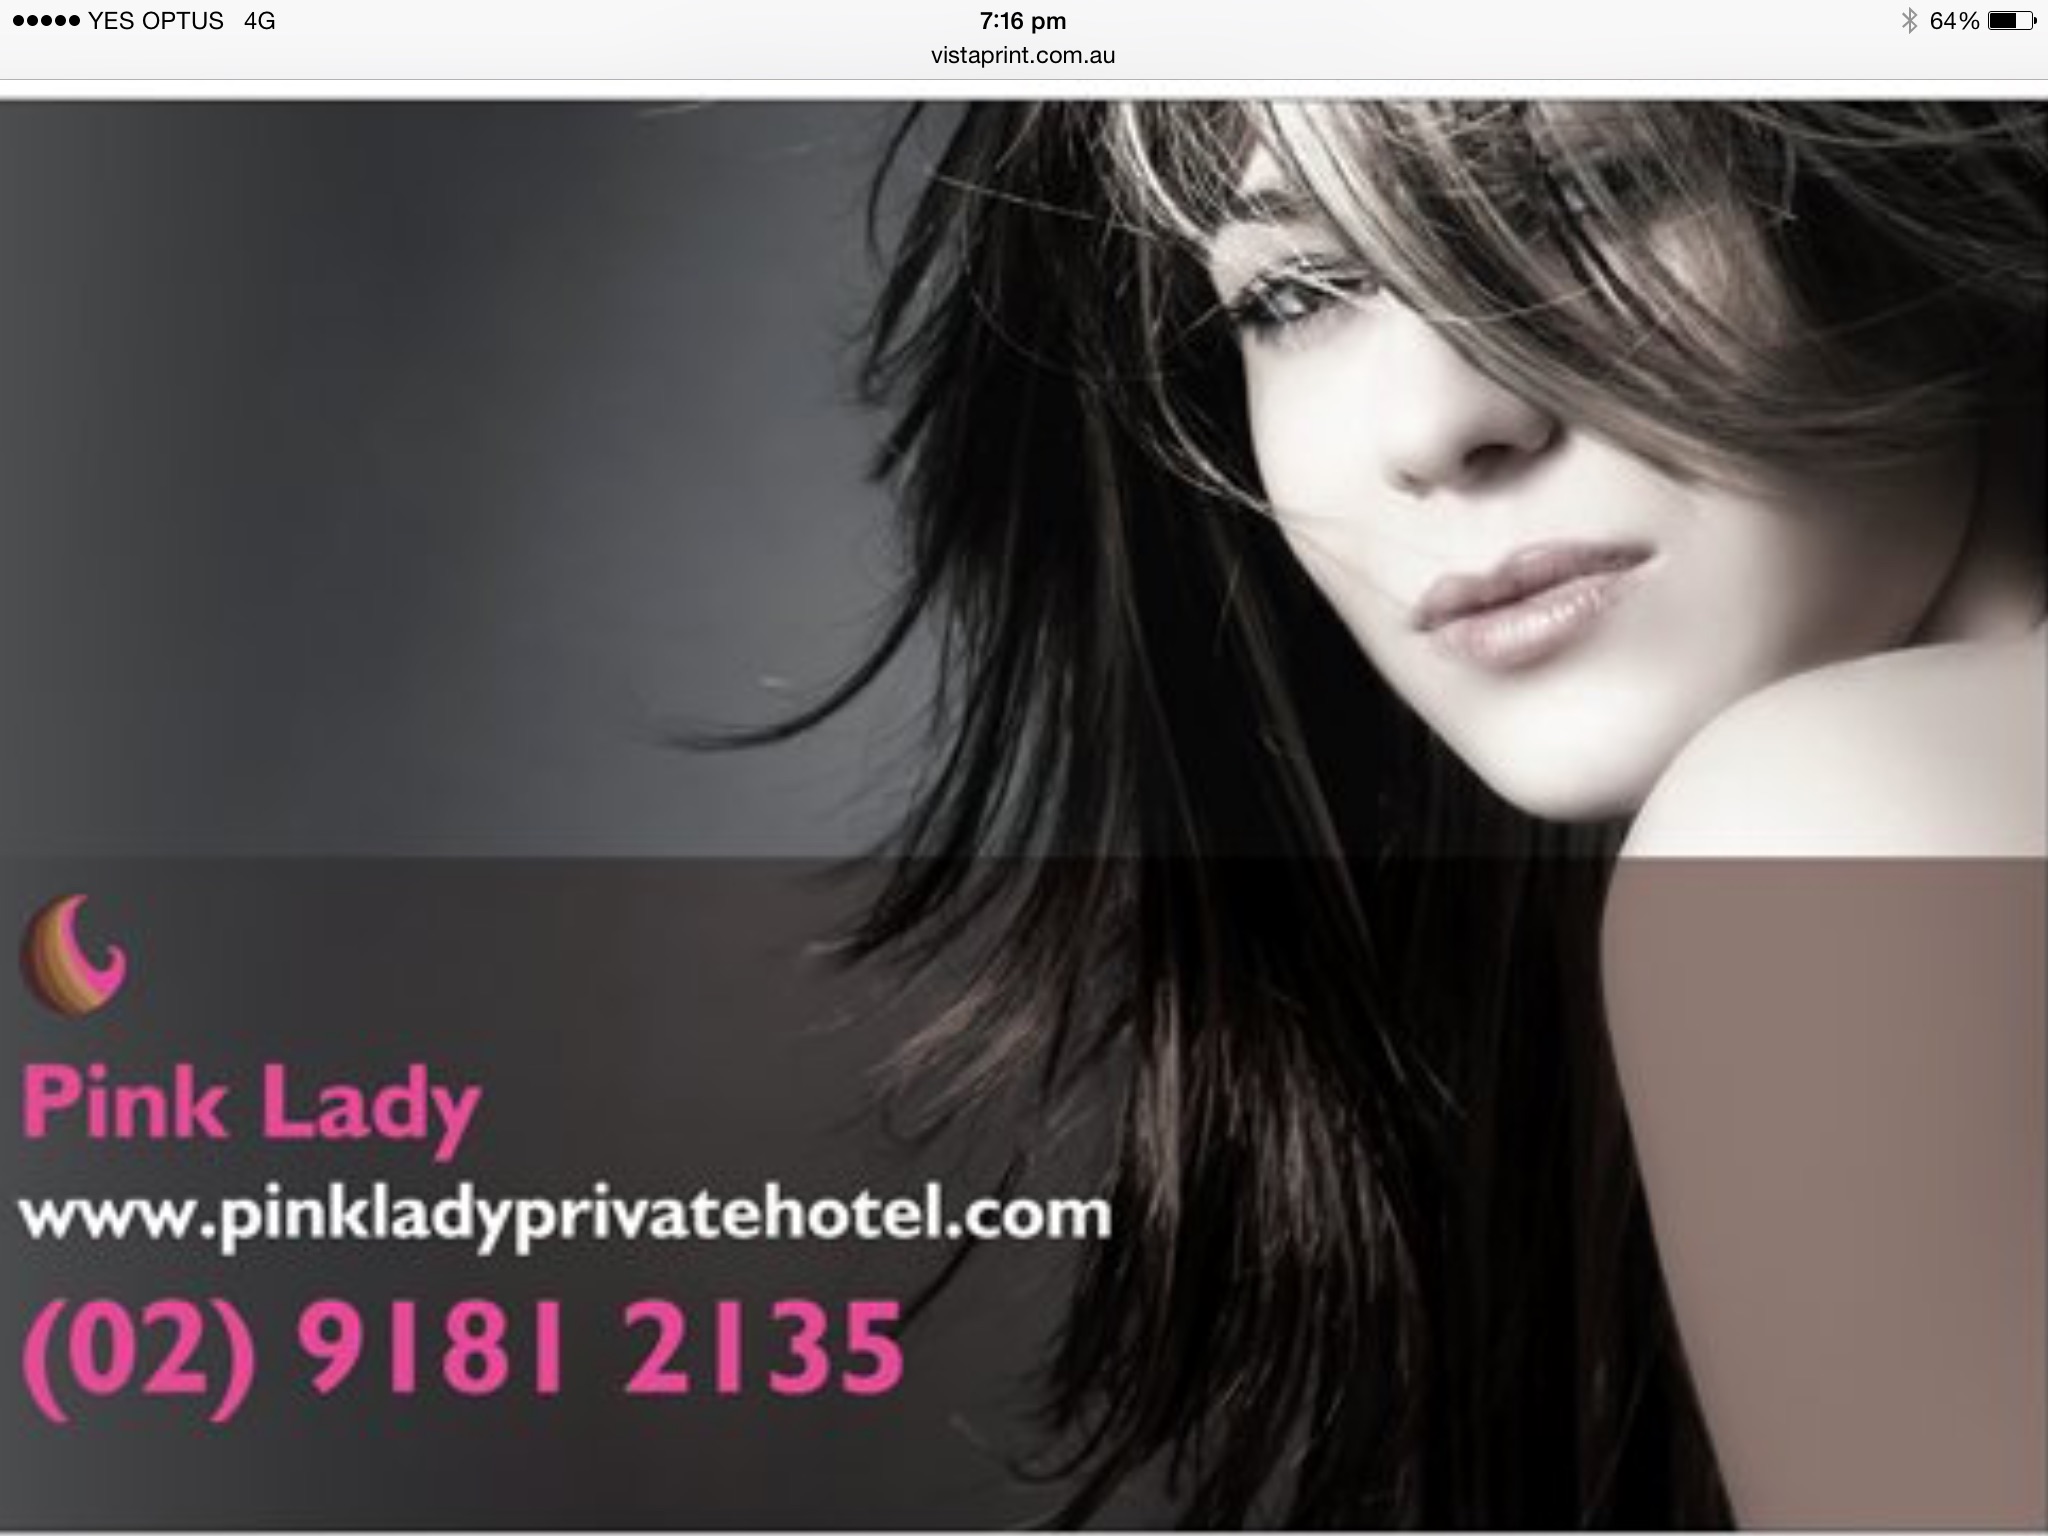 Pink Lady Private Hotel - Accommodation Resorts